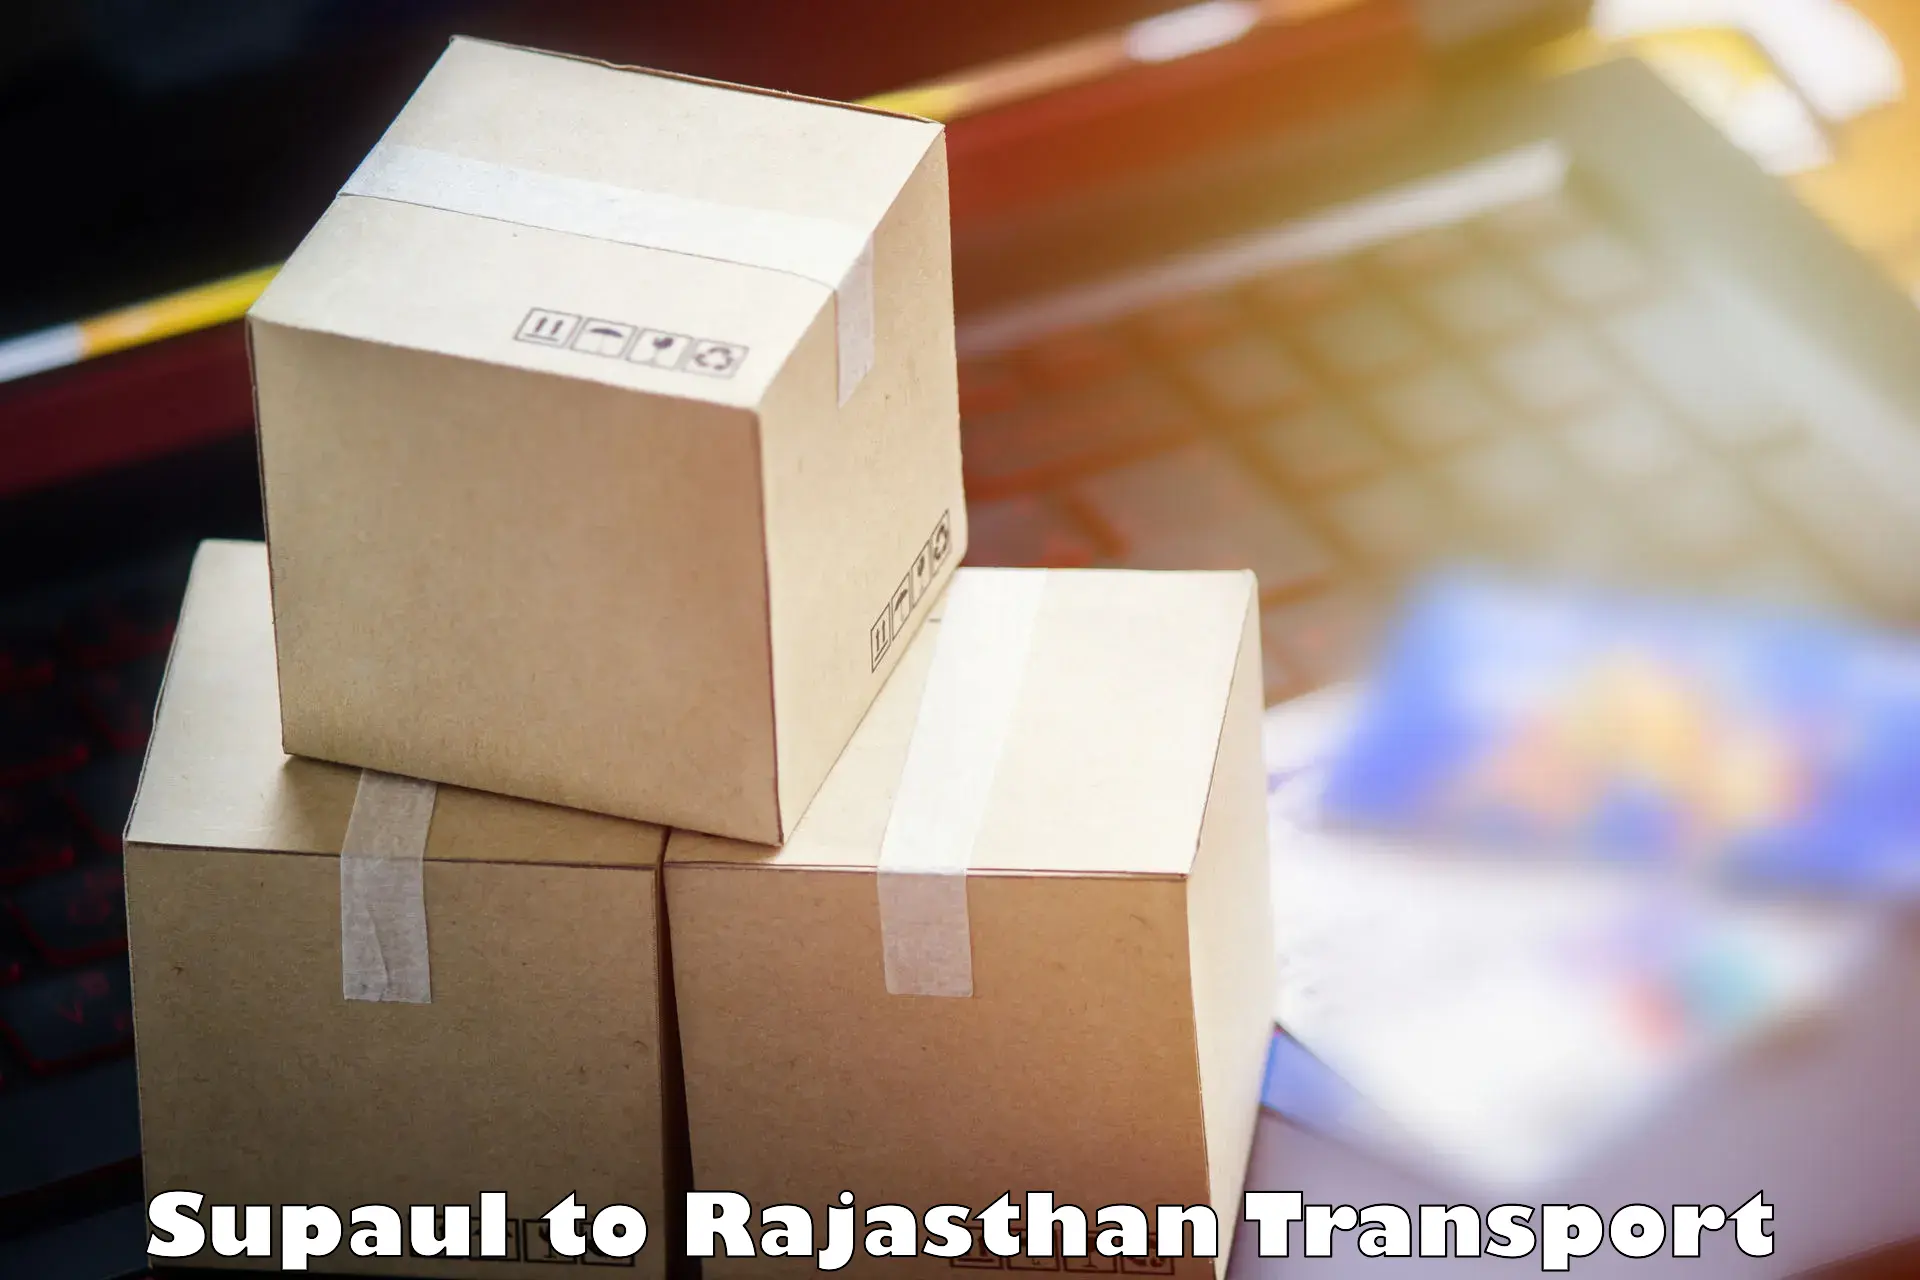 Lorry transport service Supaul to Rajasthan